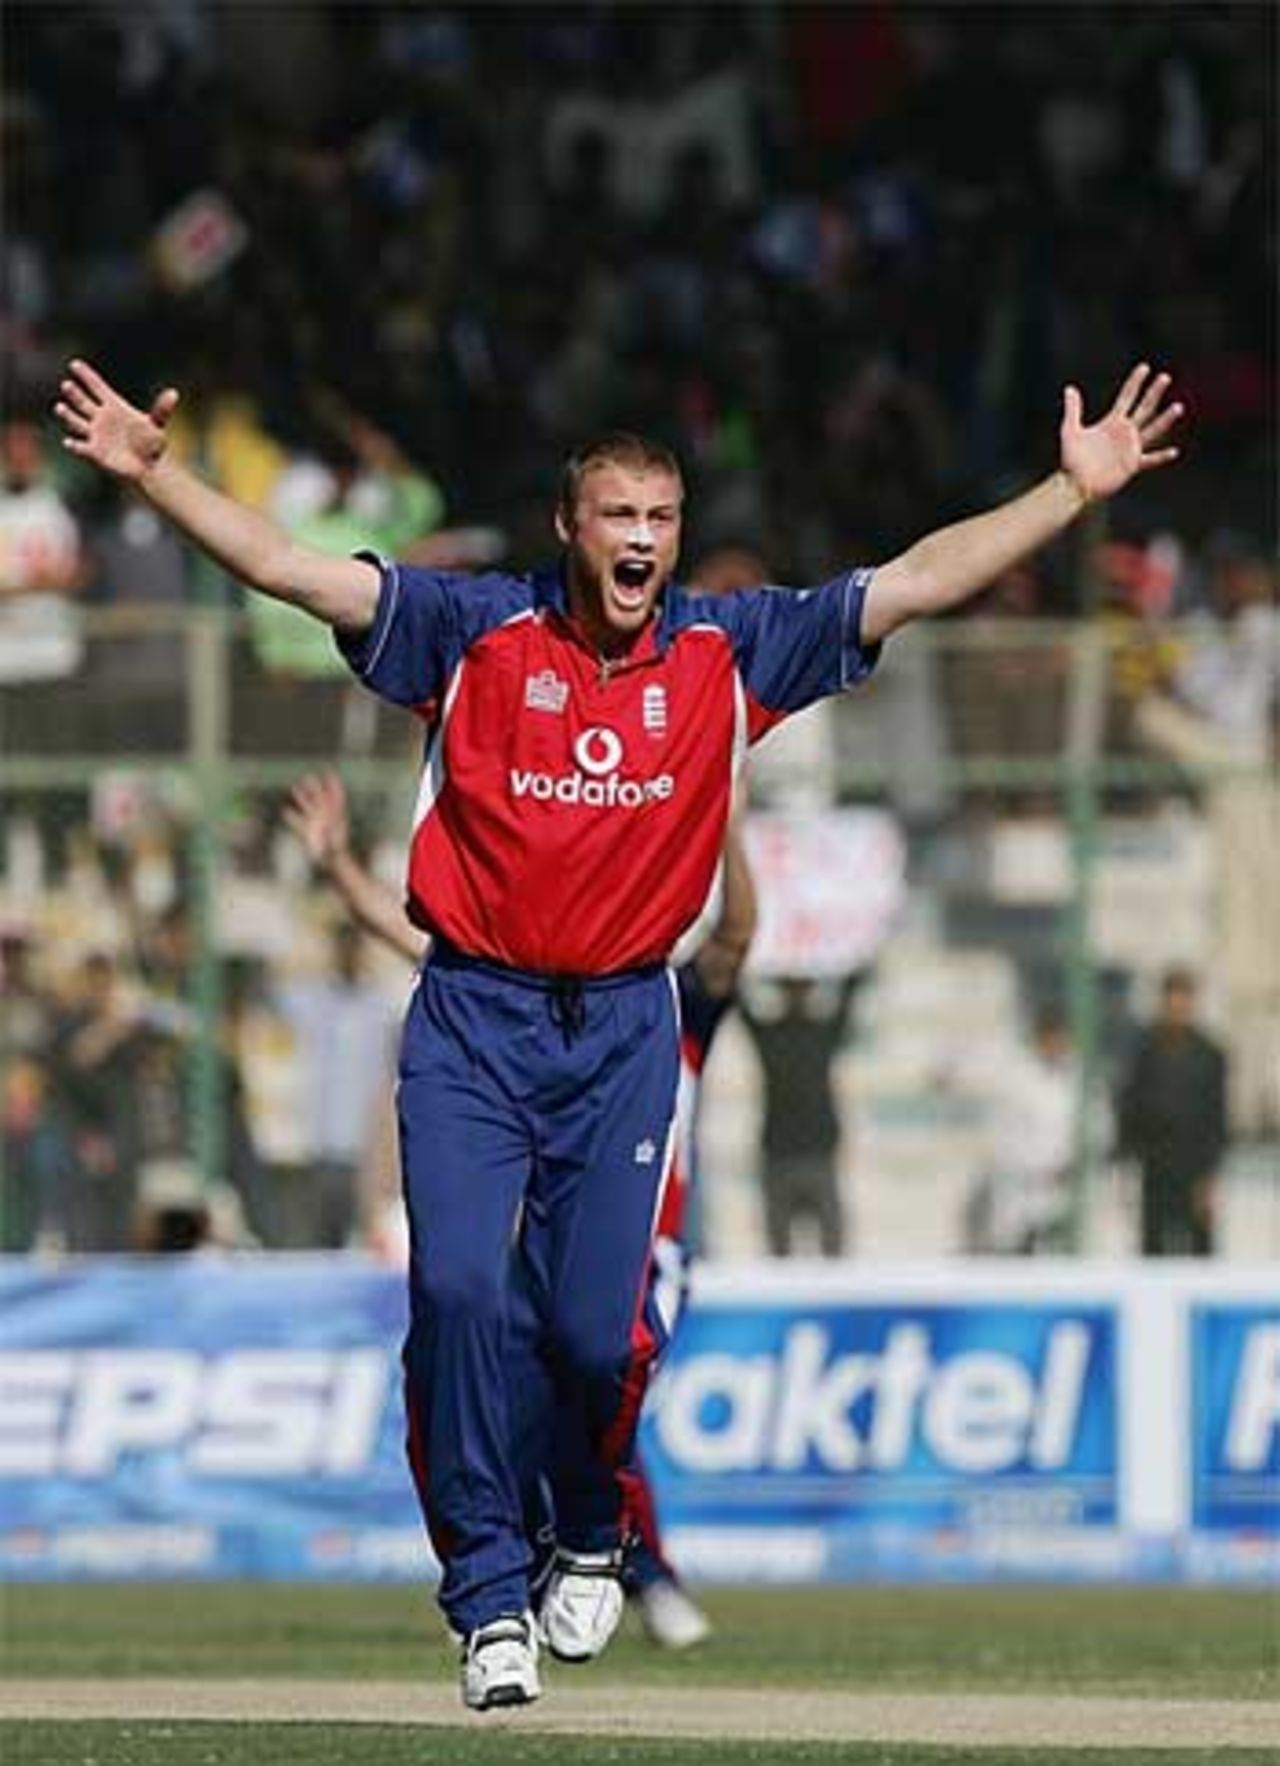 Andrew Flintoff appeals in vain on the first ball of the match for the wicket of Salman Butt, Pakistan v England, 3rd ODI, Pakistan, December 15, 2005